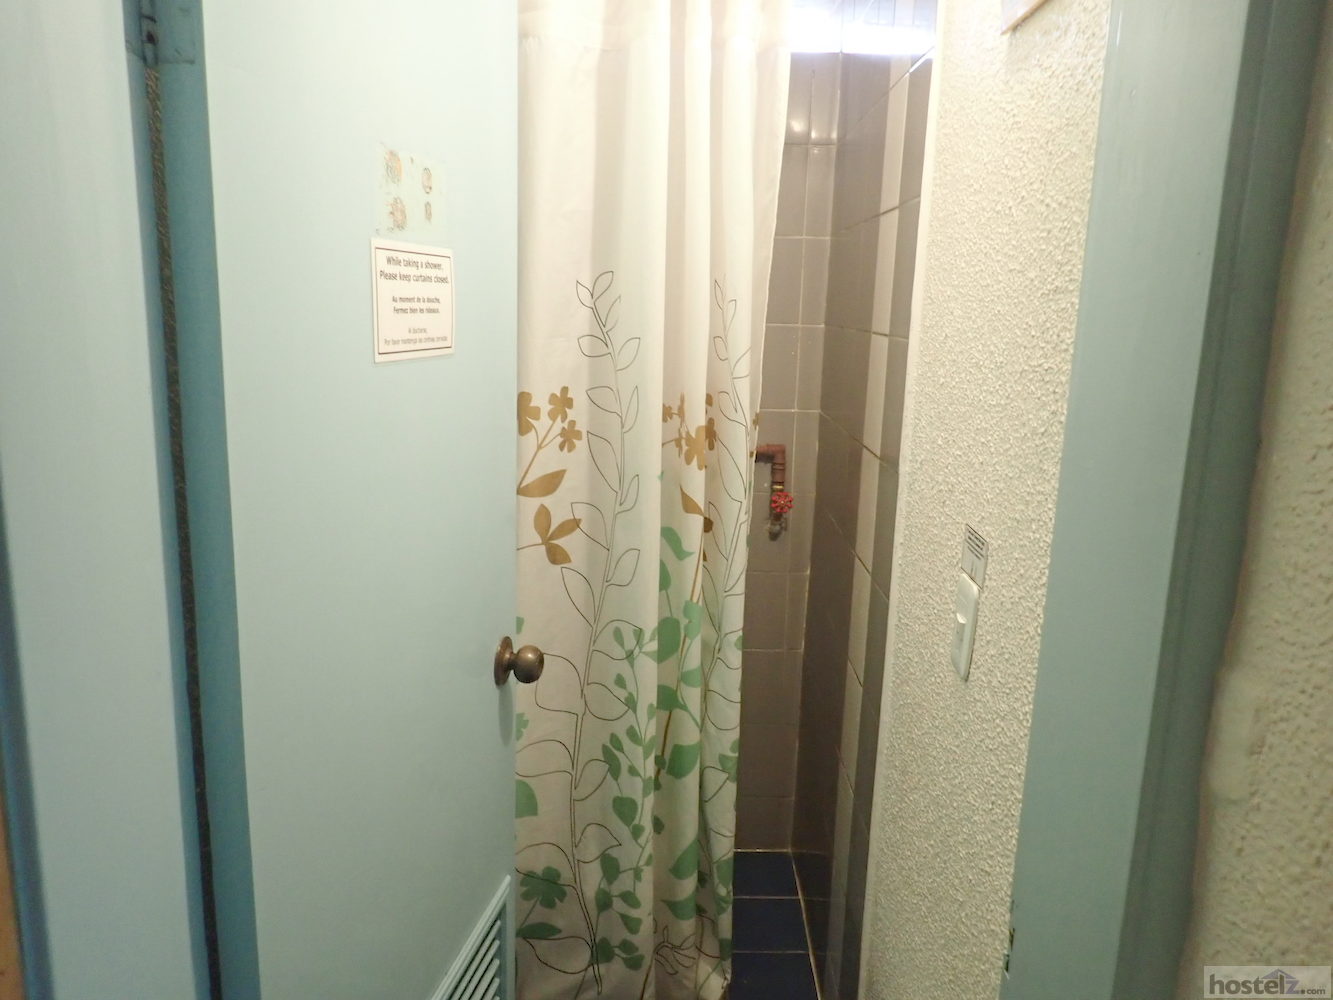 One of the communal showers